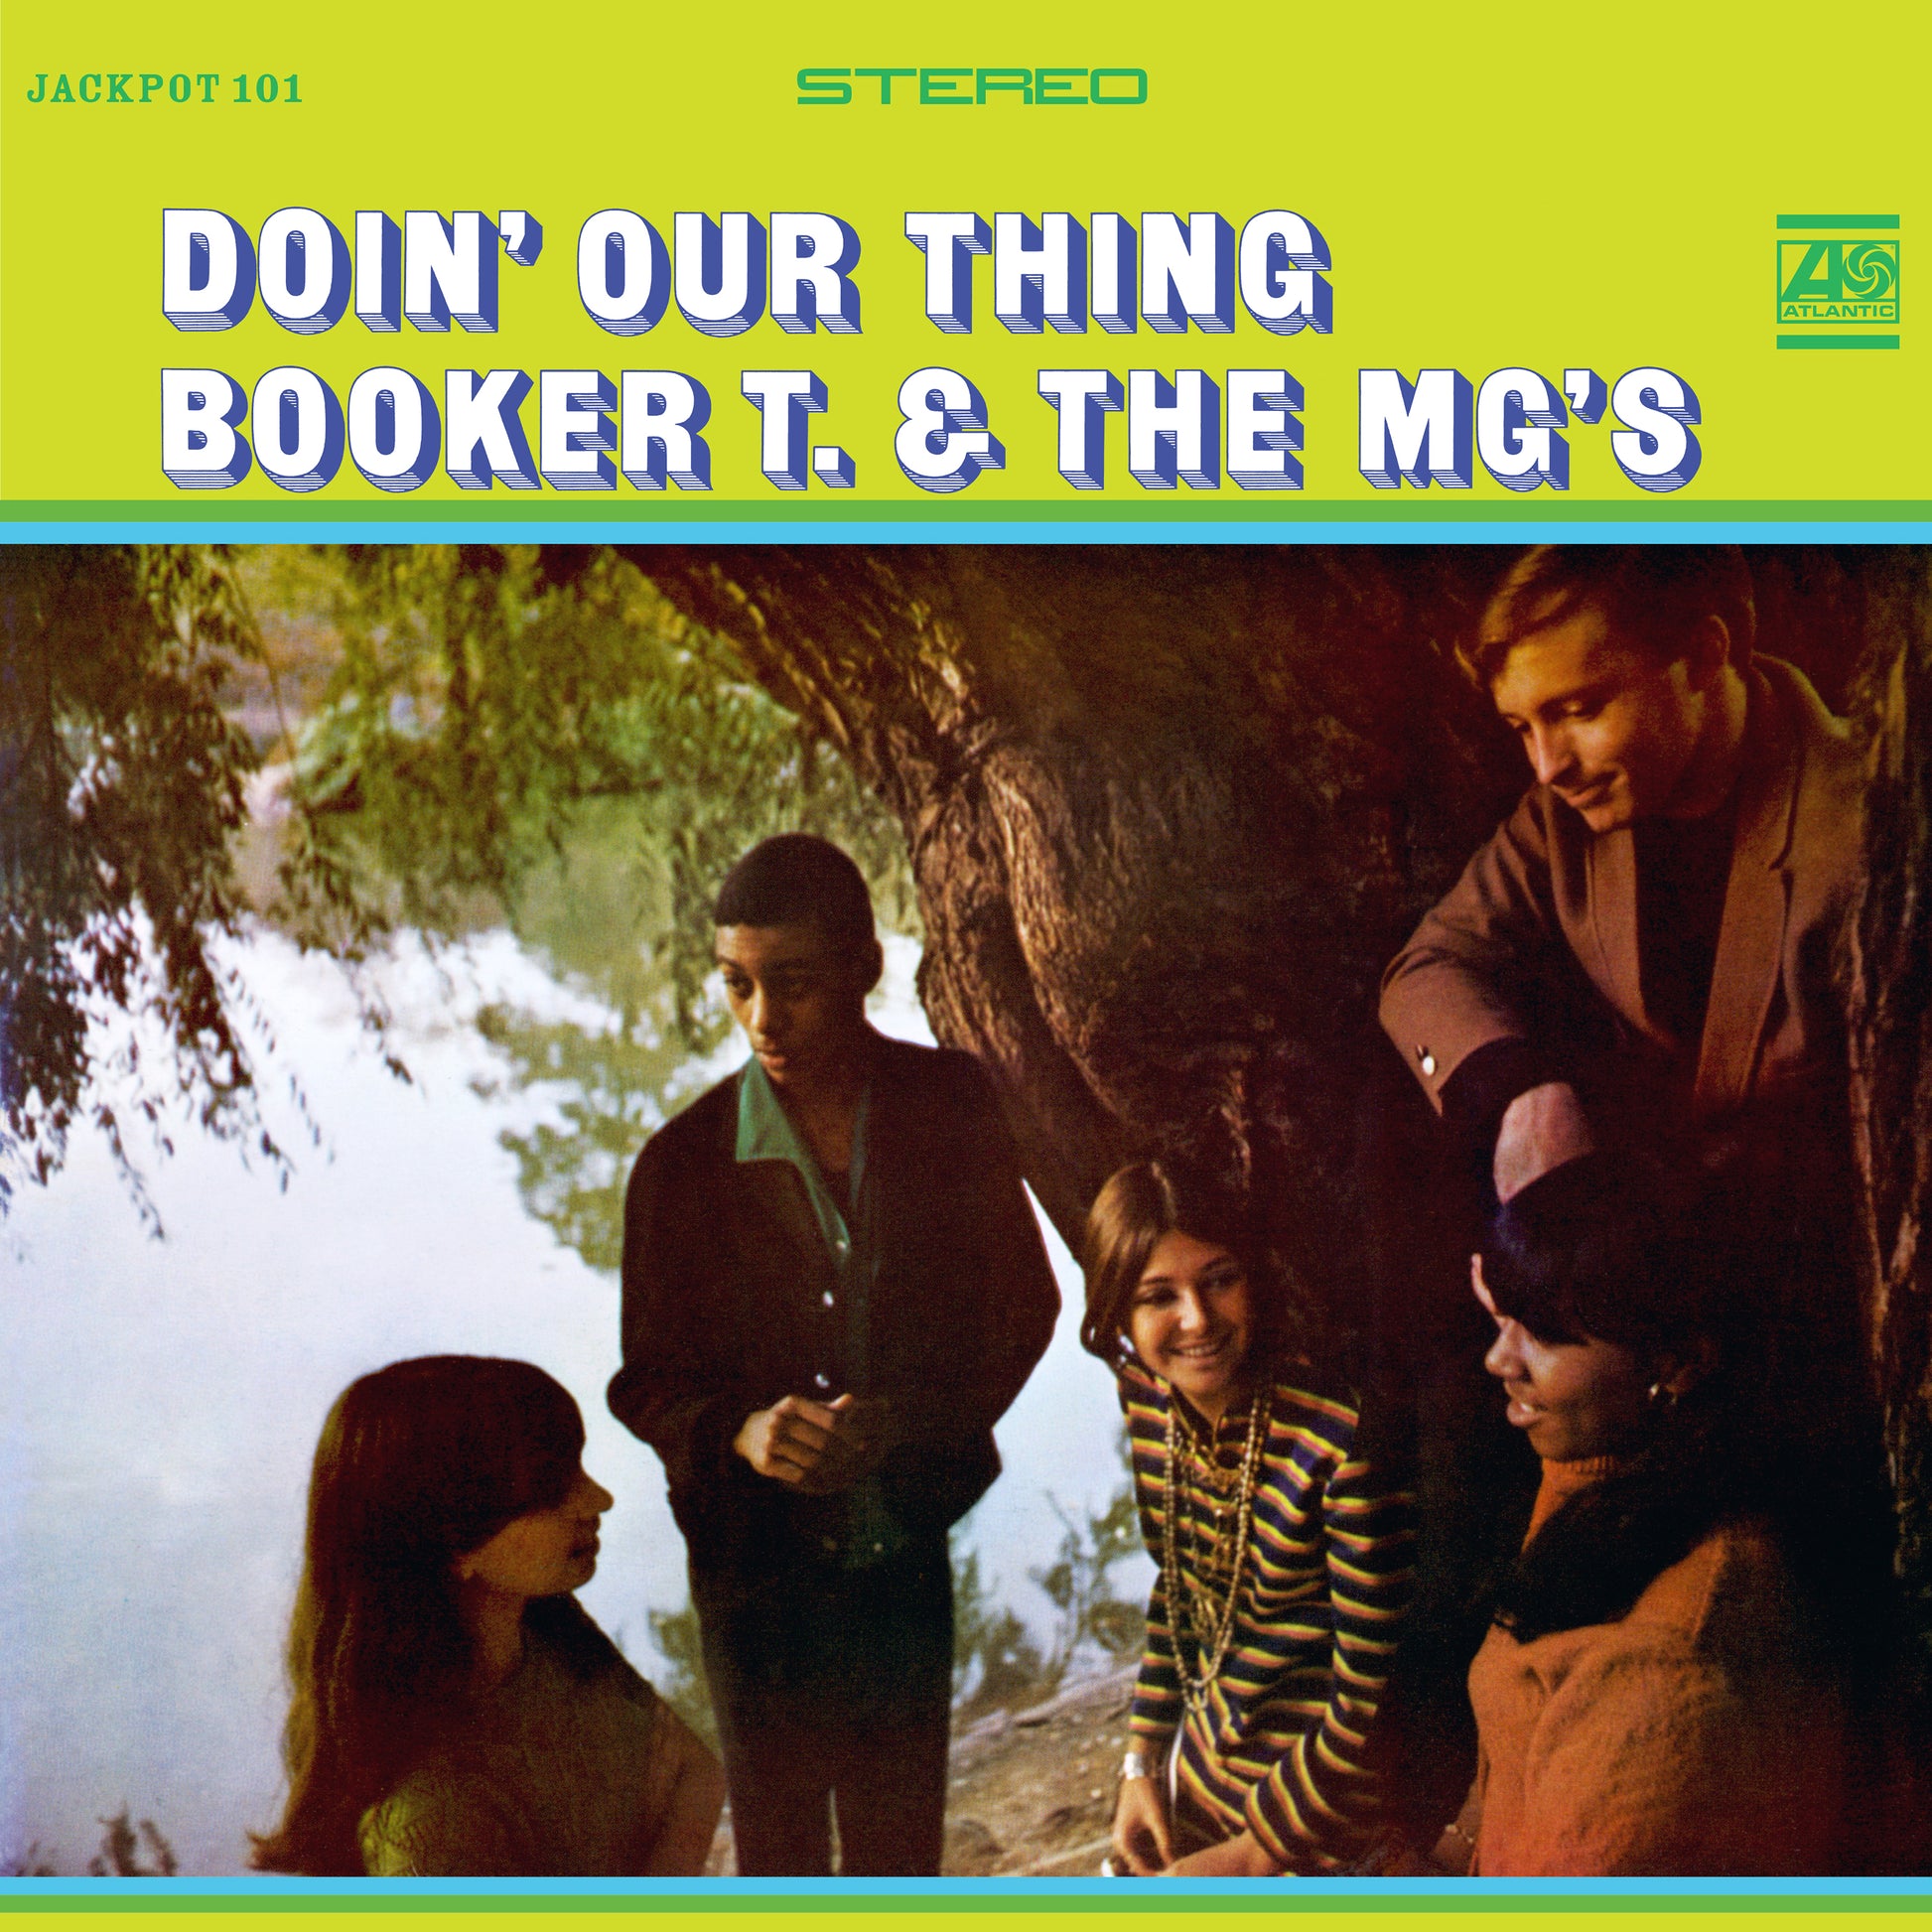 JPR101 - BOOKER T. & THE MG’S - Doin’ Our Thing